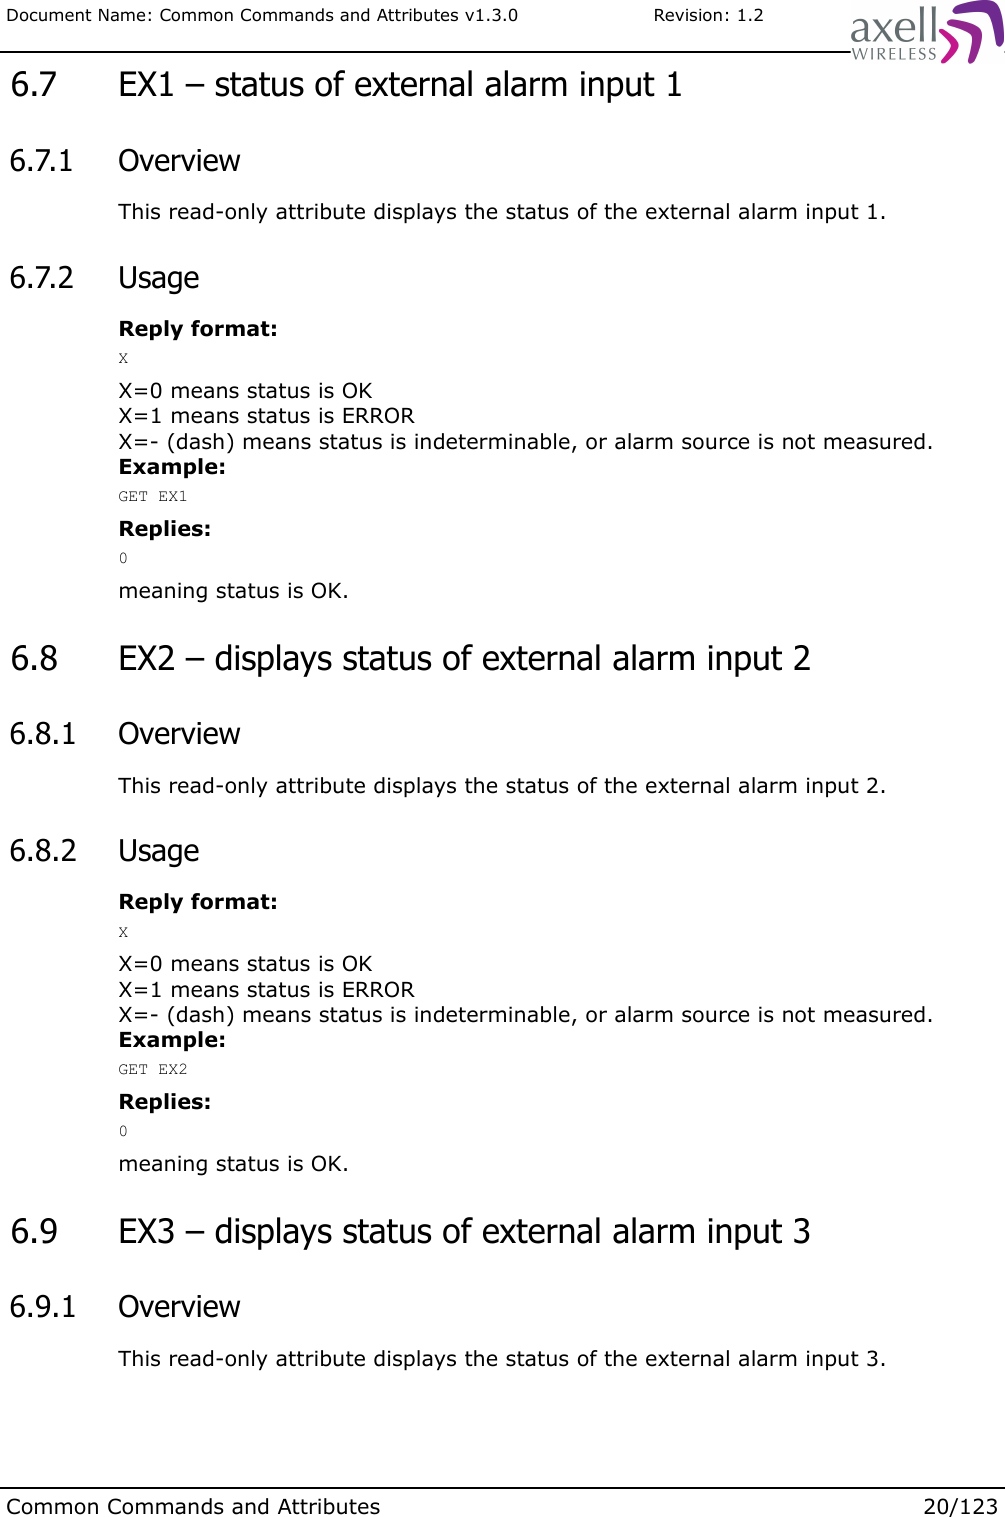 Document Name: Common Commands and Attributes v1.3.0                       Revision: 1.2 6.7  EX1 – status of external alarm input 1 6.7.1  OverviewThis read-only attribute displays the status of the external alarm input 1. 6.7.2  UsageReply format:XX=0 means status is OKX=1 means status is ERRORX=- (dash) means status is indeterminable, or alarm source is not measured.Example:GET EX1Replies:0meaning status is OK. 6.8  EX2 – displays status of external alarm input 2 6.8.1  OverviewThis read-only attribute displays the status of the external alarm input 2. 6.8.2  UsageReply format:XX=0 means status is OKX=1 means status is ERRORX=- (dash) means status is indeterminable, or alarm source is not measured.Example:GET EX2Replies:0meaning status is OK. 6.9  EX3 – displays status of external alarm input 3 6.9.1  OverviewThis read-only attribute displays the status of the external alarm input 3.Common Commands and Attributes 20/123